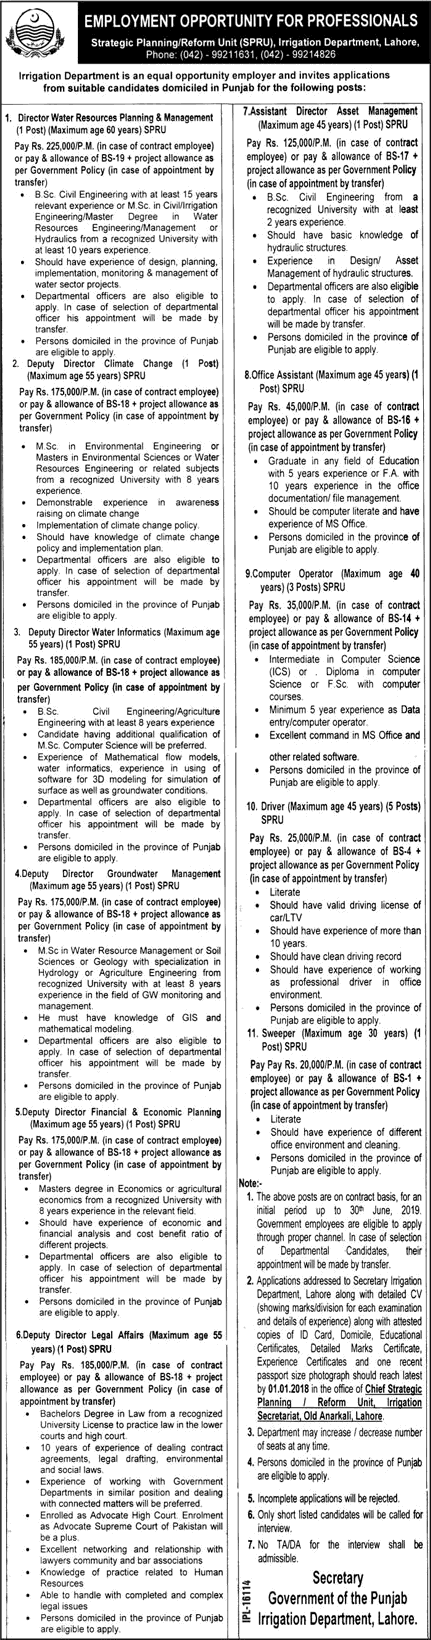 Irrigation Department Punjab Jobs December 2017 Lahore Computer Operators, Drivers & Others Latest